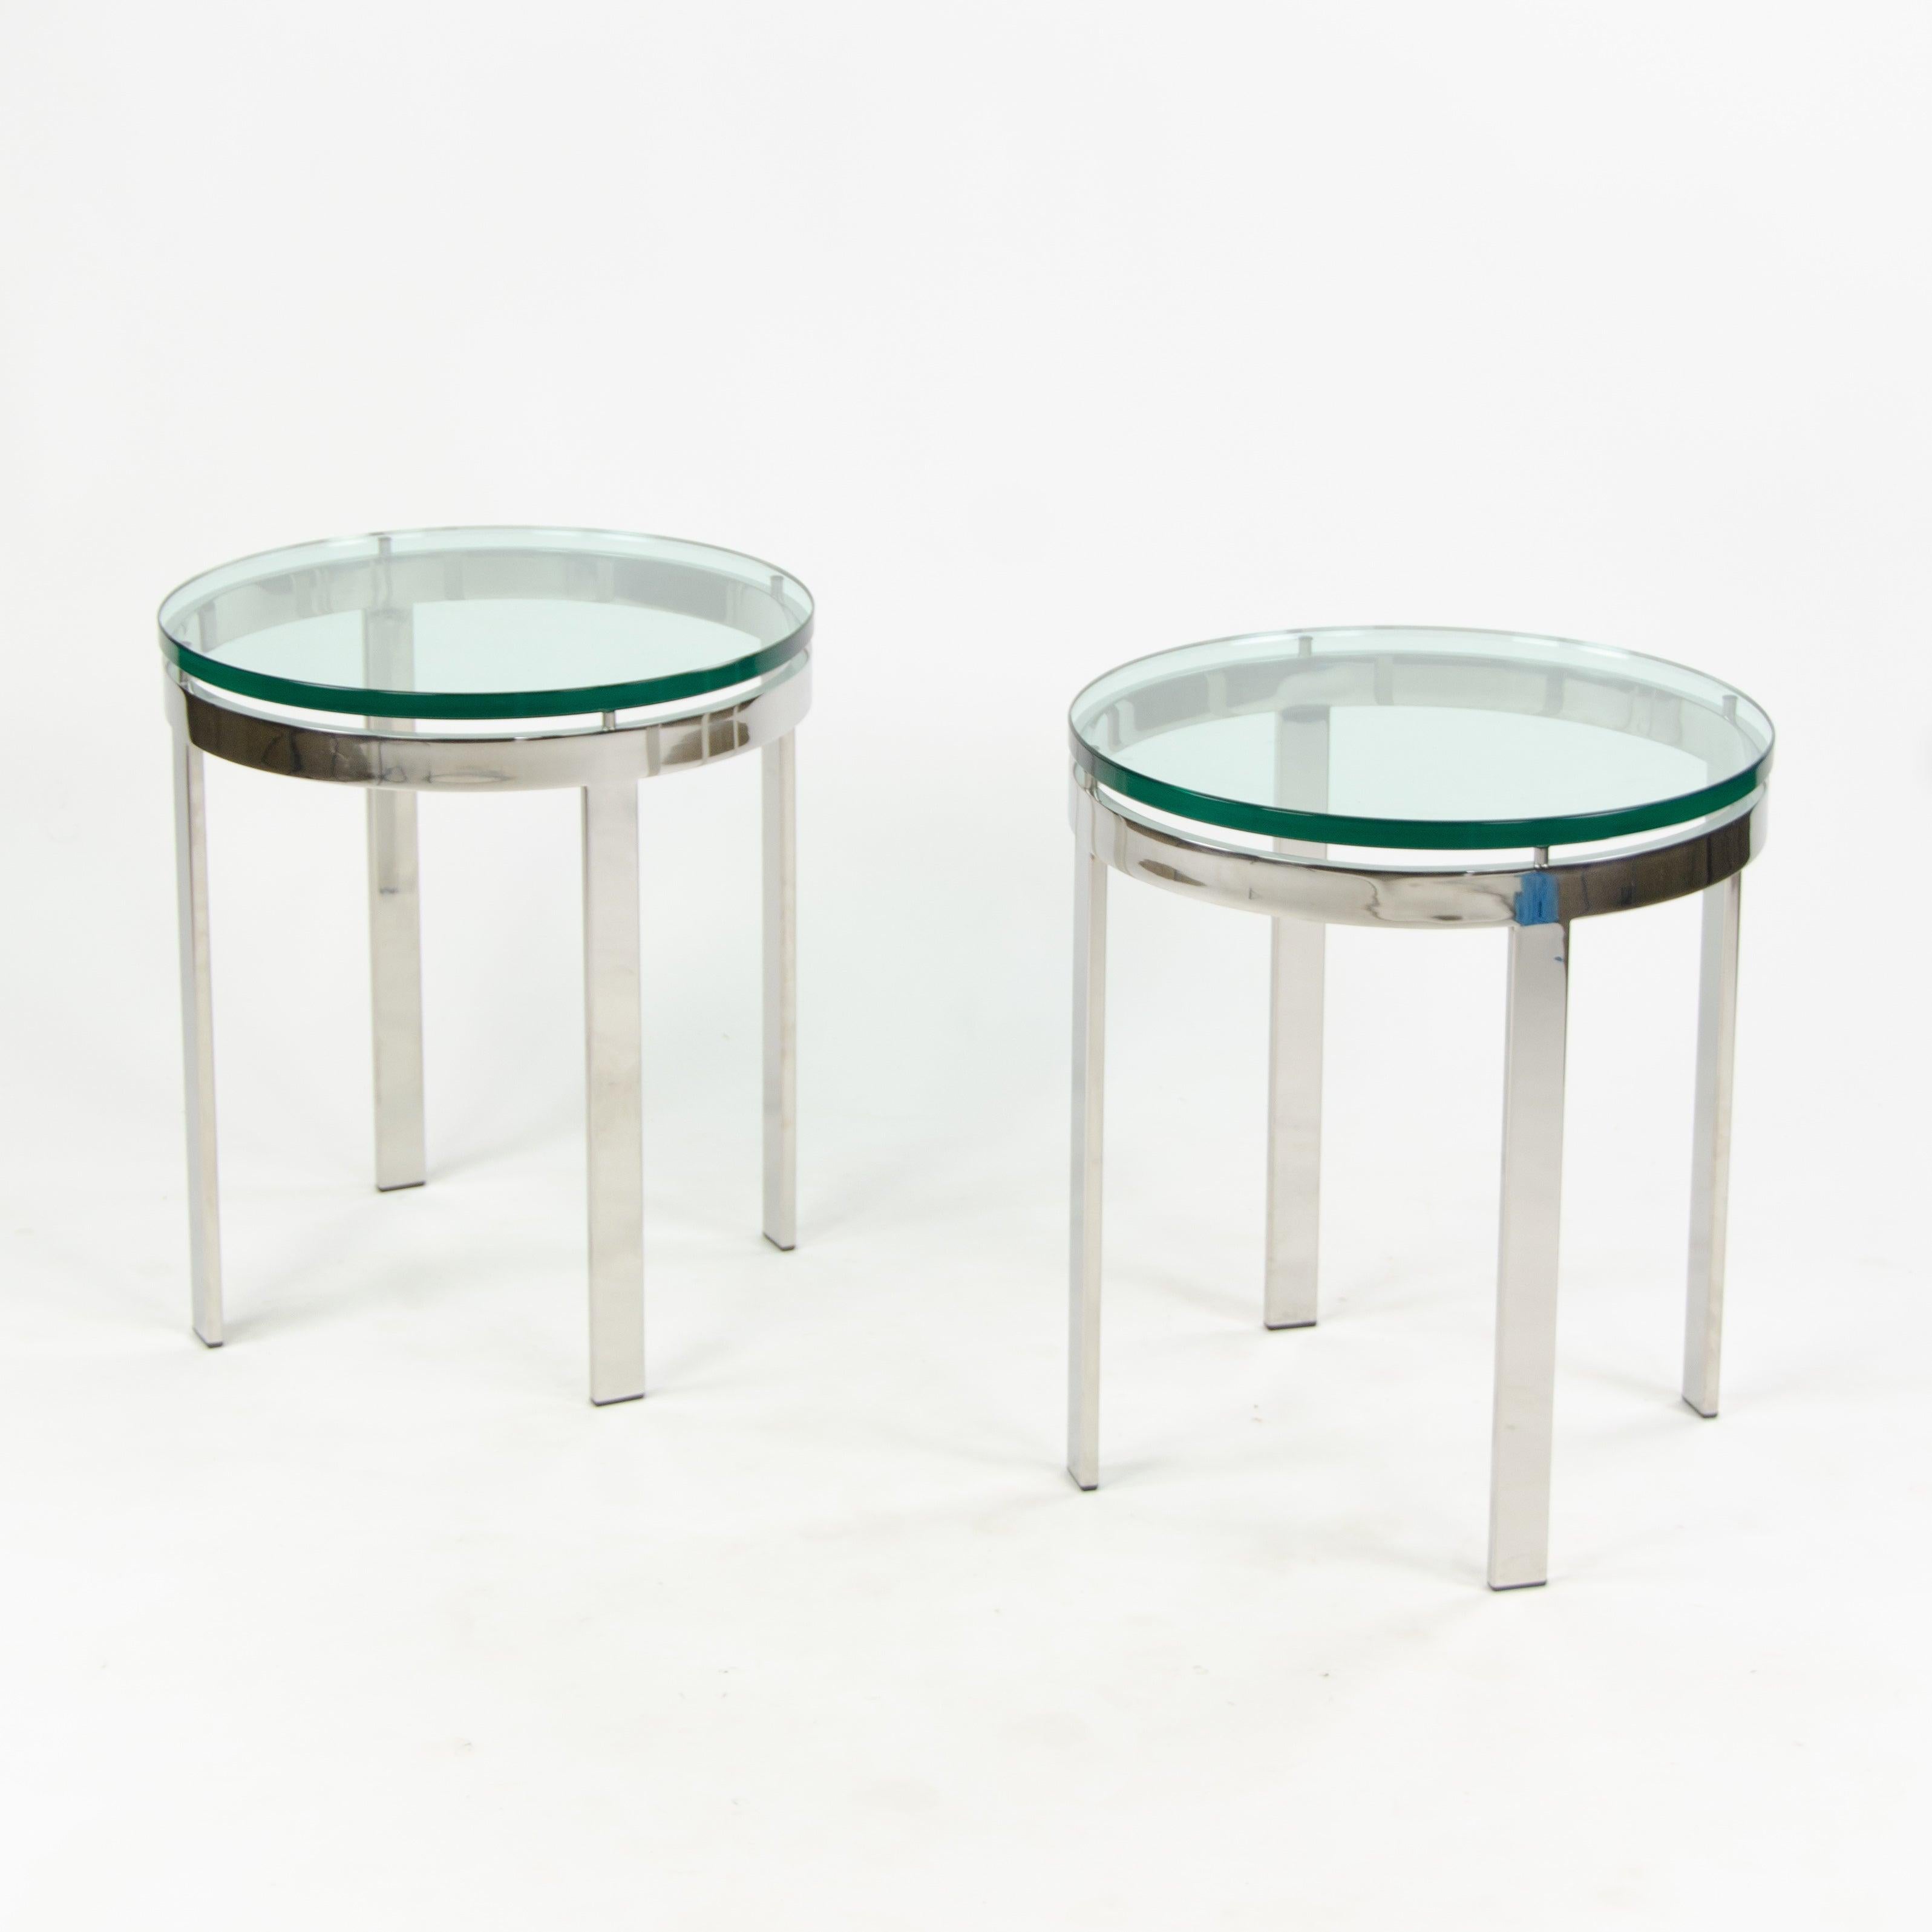 Listed for sale is a very rare grouping of original Nicos Zographos glass side tables, produced by Zographos Designs Limited. The renowned industrial designer became ahousehold name at Skidmore, Owings, and Merrill (SOM) during the late 1950's and